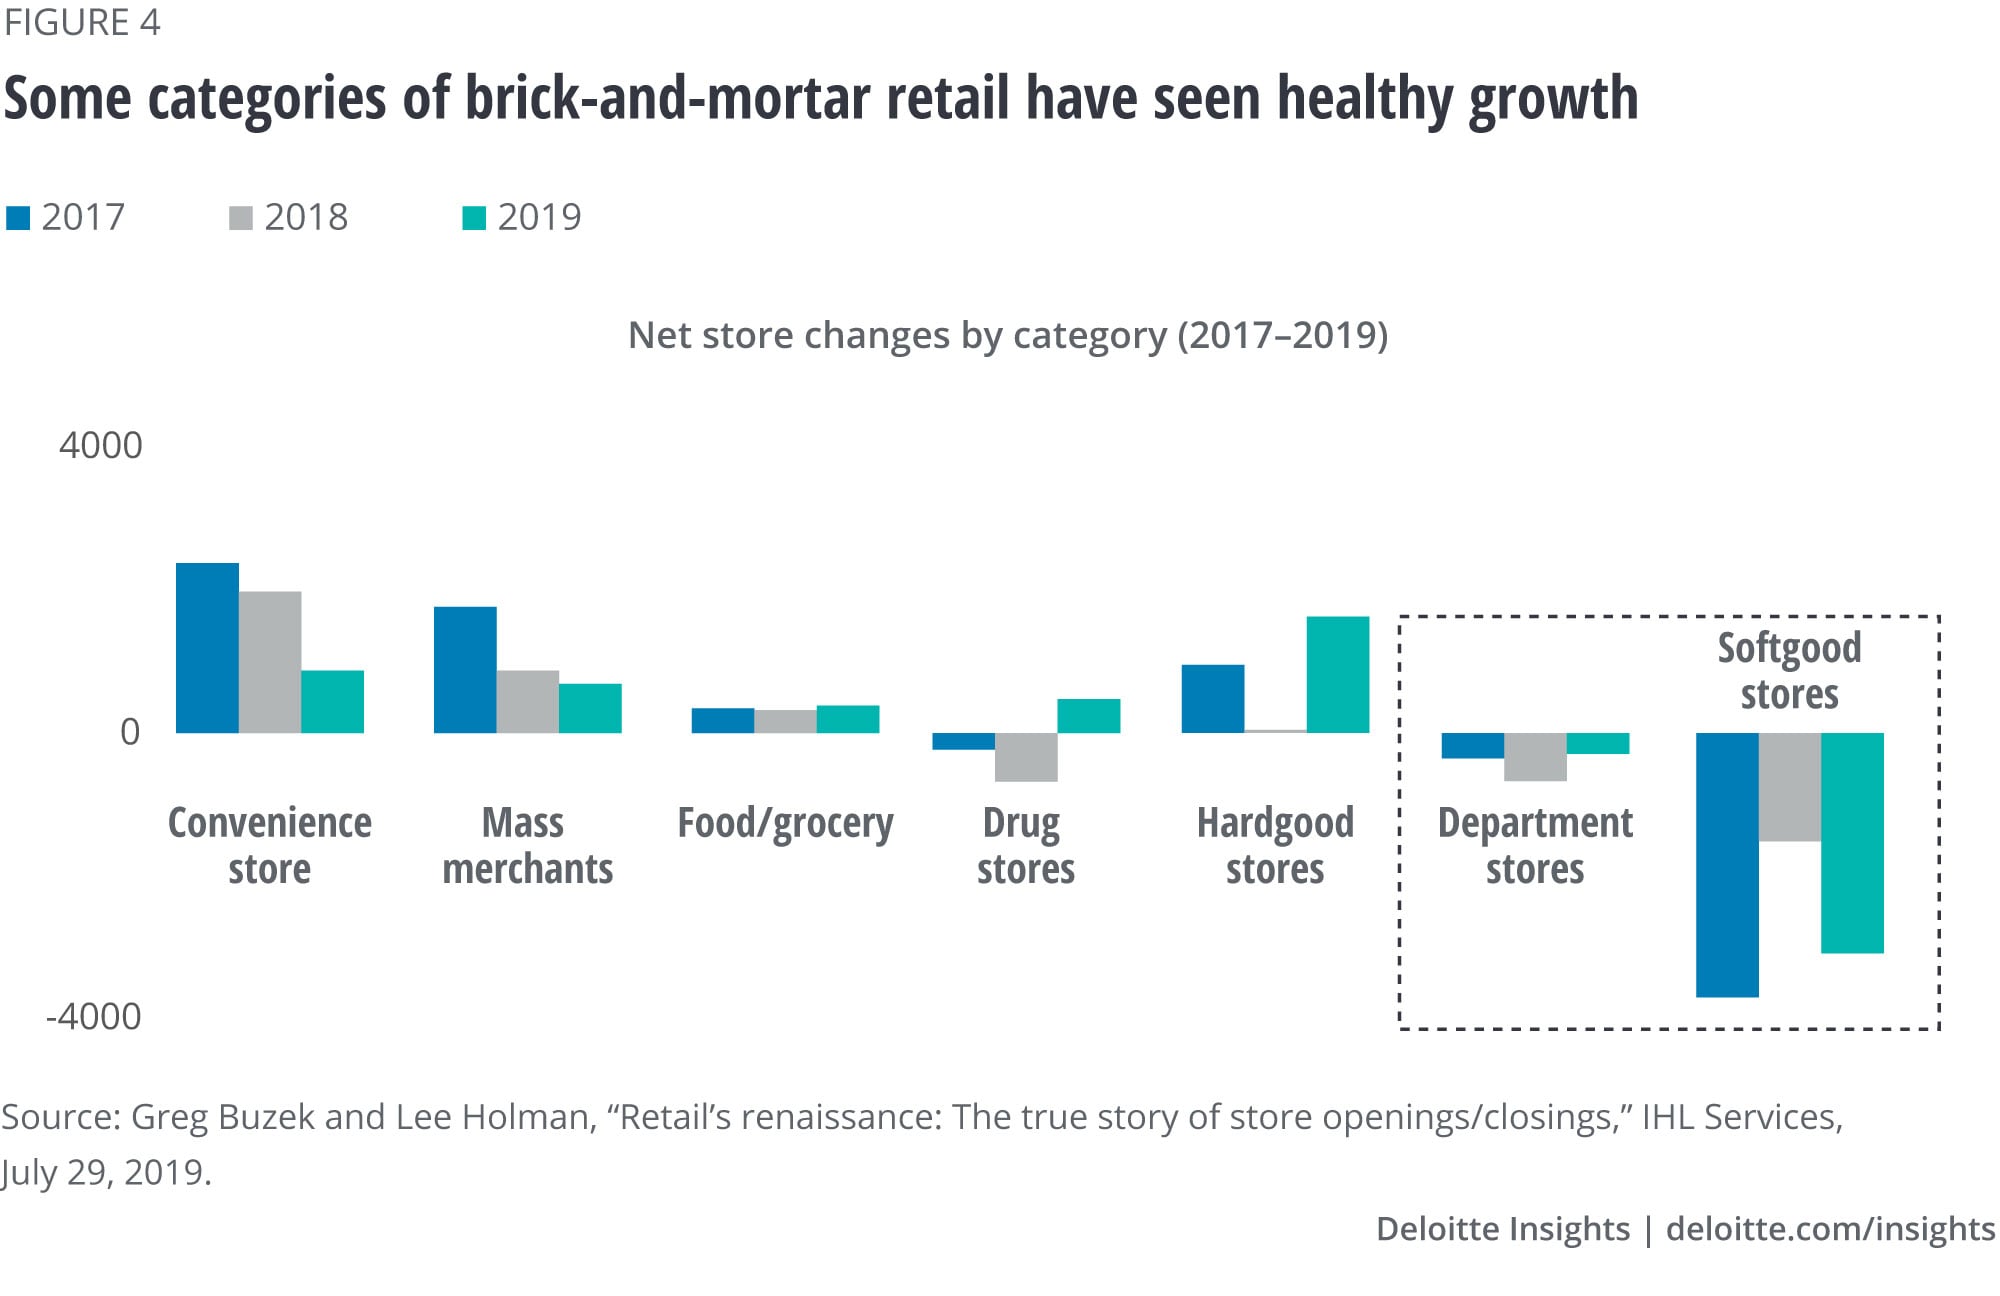 Some categories of brick-and-mortar retail have seen healthy growth